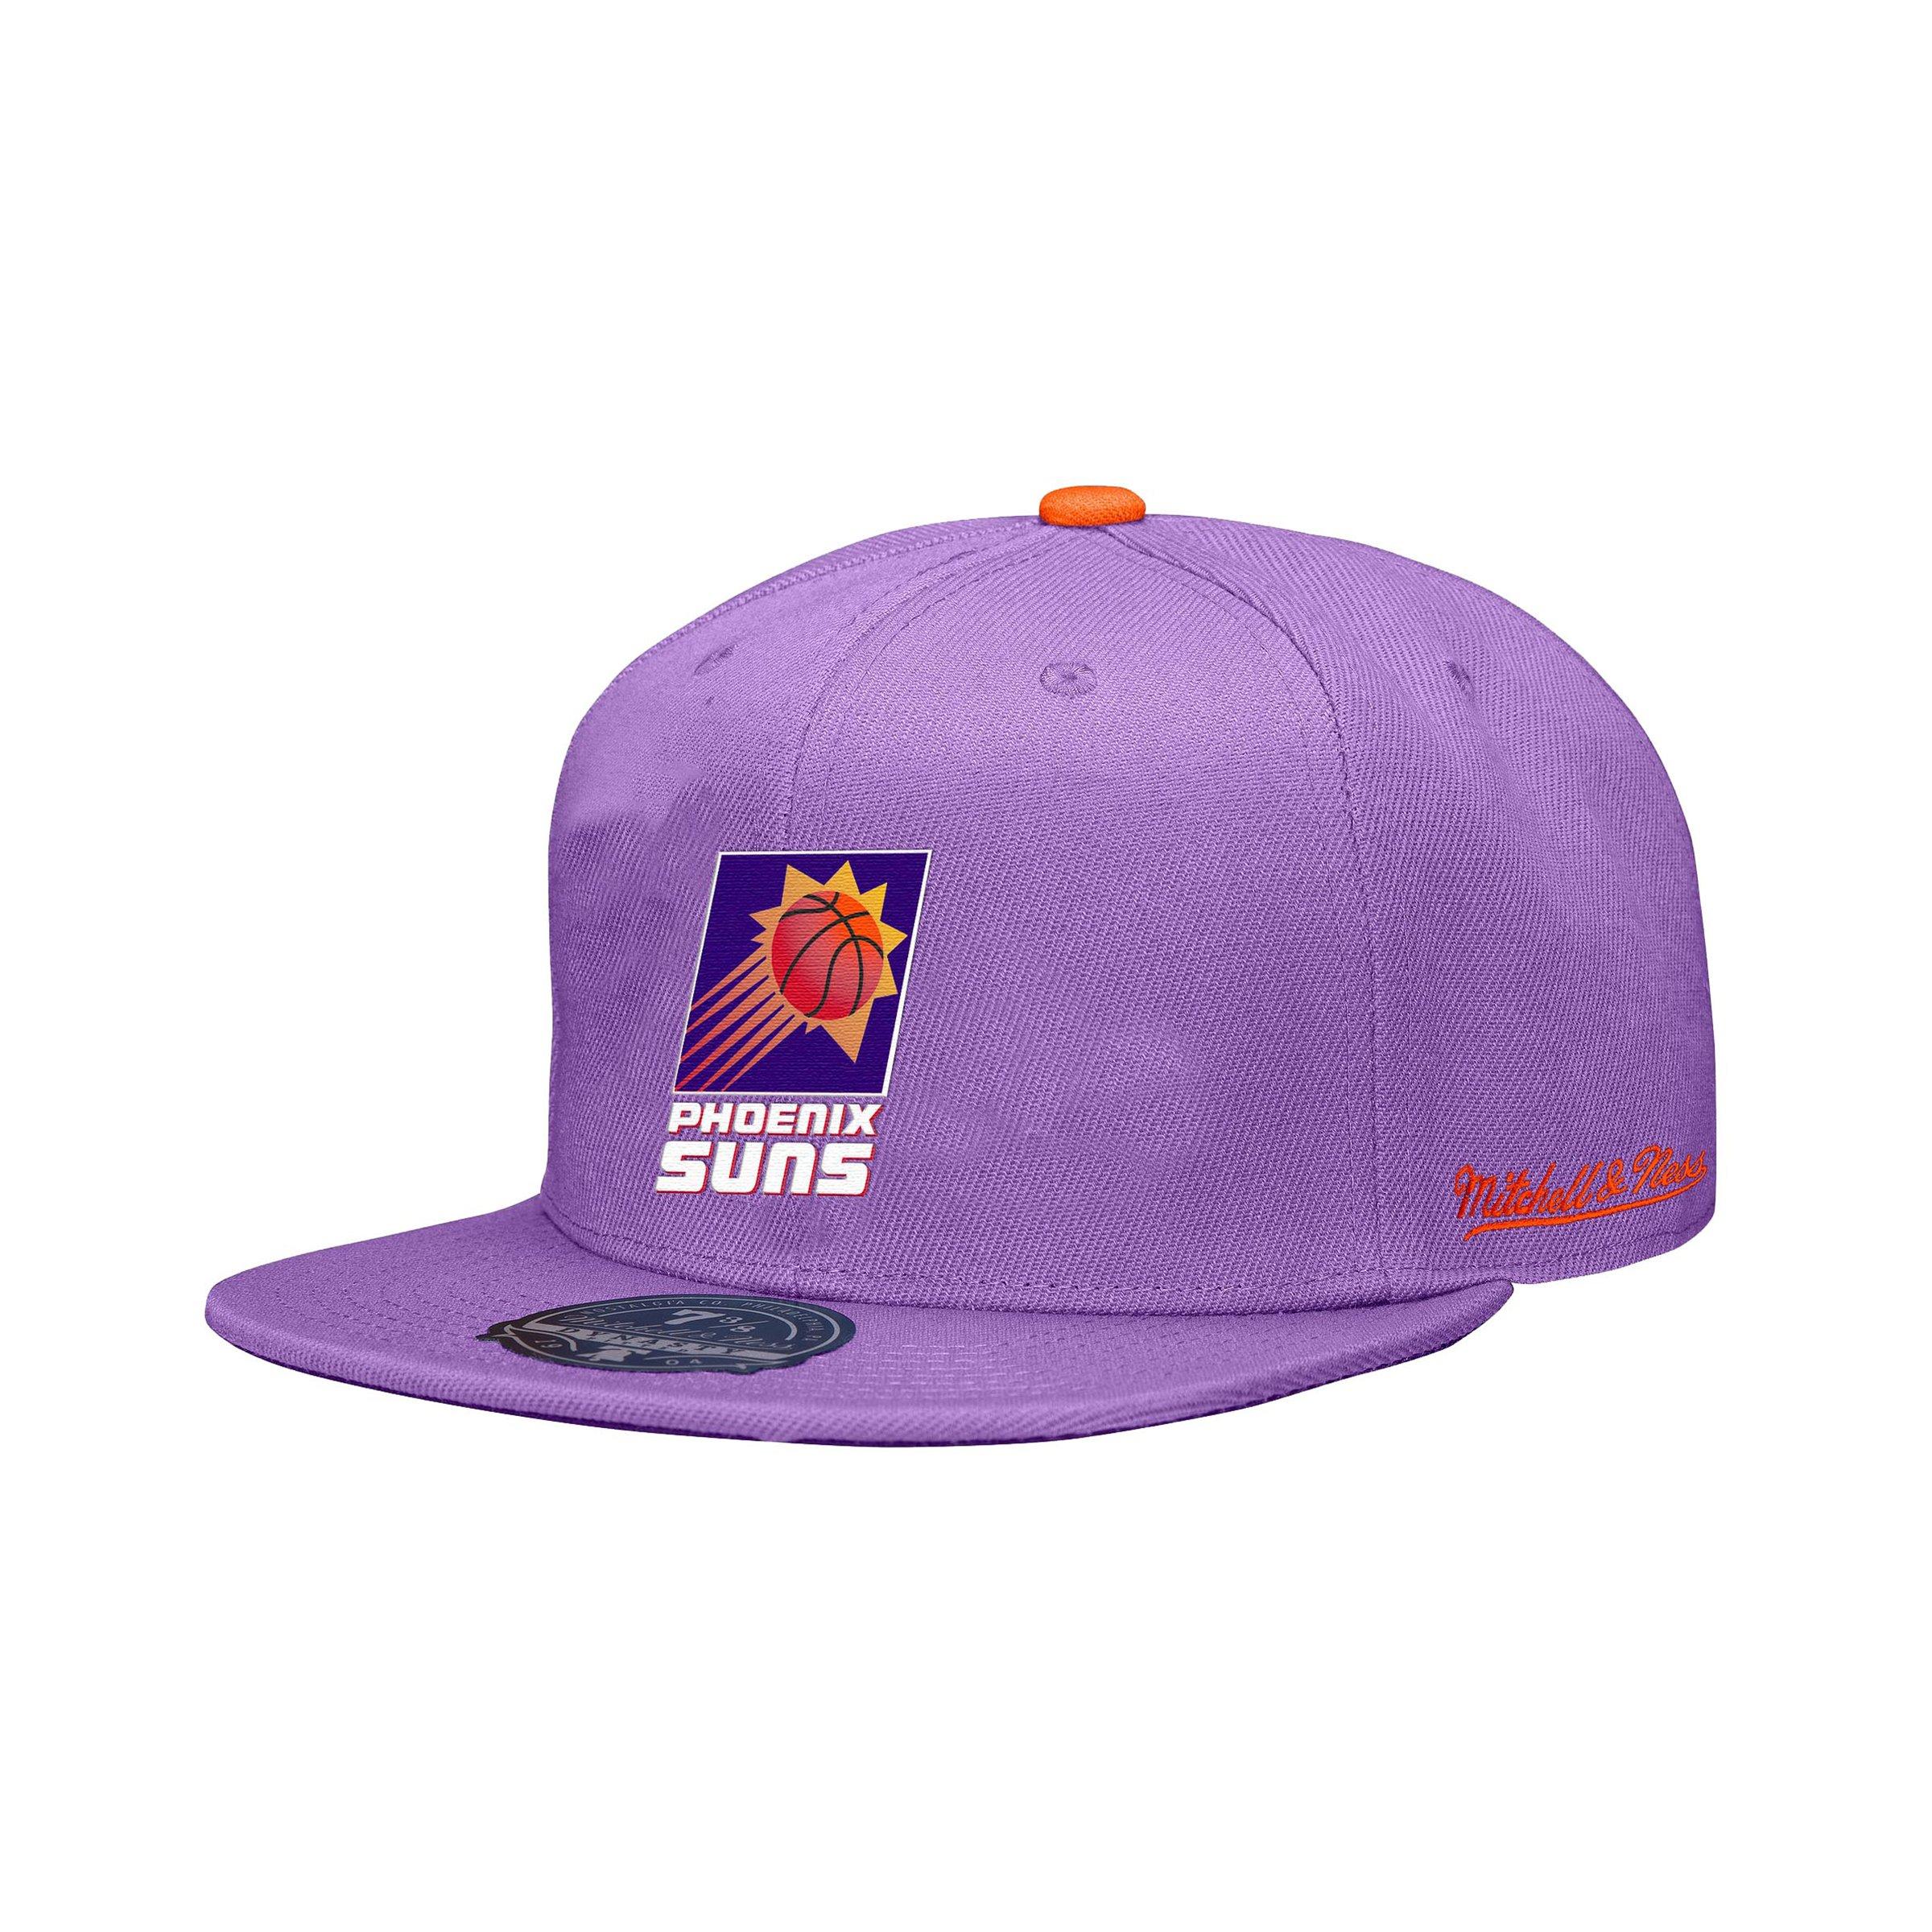 City Gear - Rate this fit! 🔥 or 💩? Get this Mitchell & Ness Suns